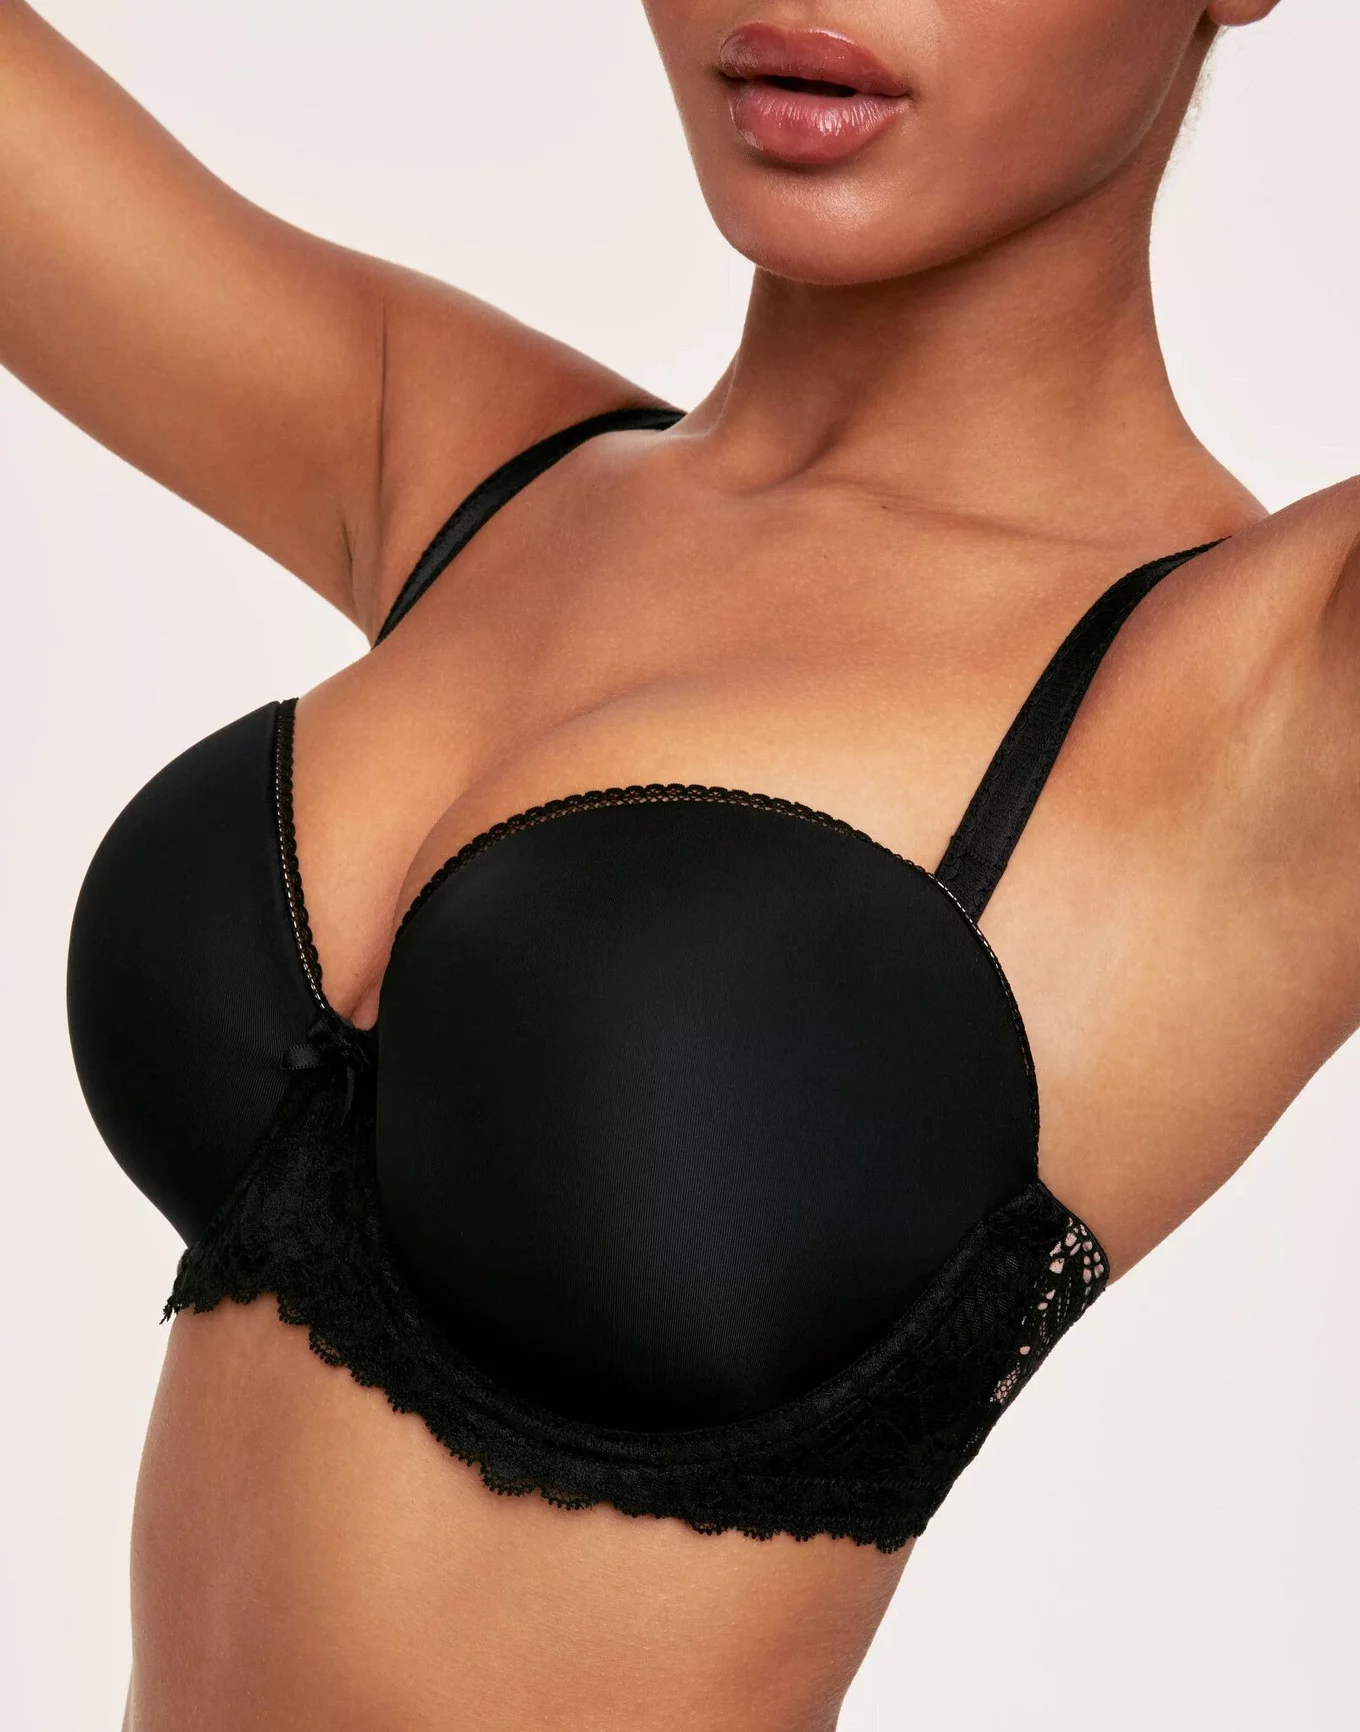 Adore Me Super sexy 34DDD Push Up bra Black Size 34 F / DDD - $36 (38% Off  Retail) New With Tags - From Heather